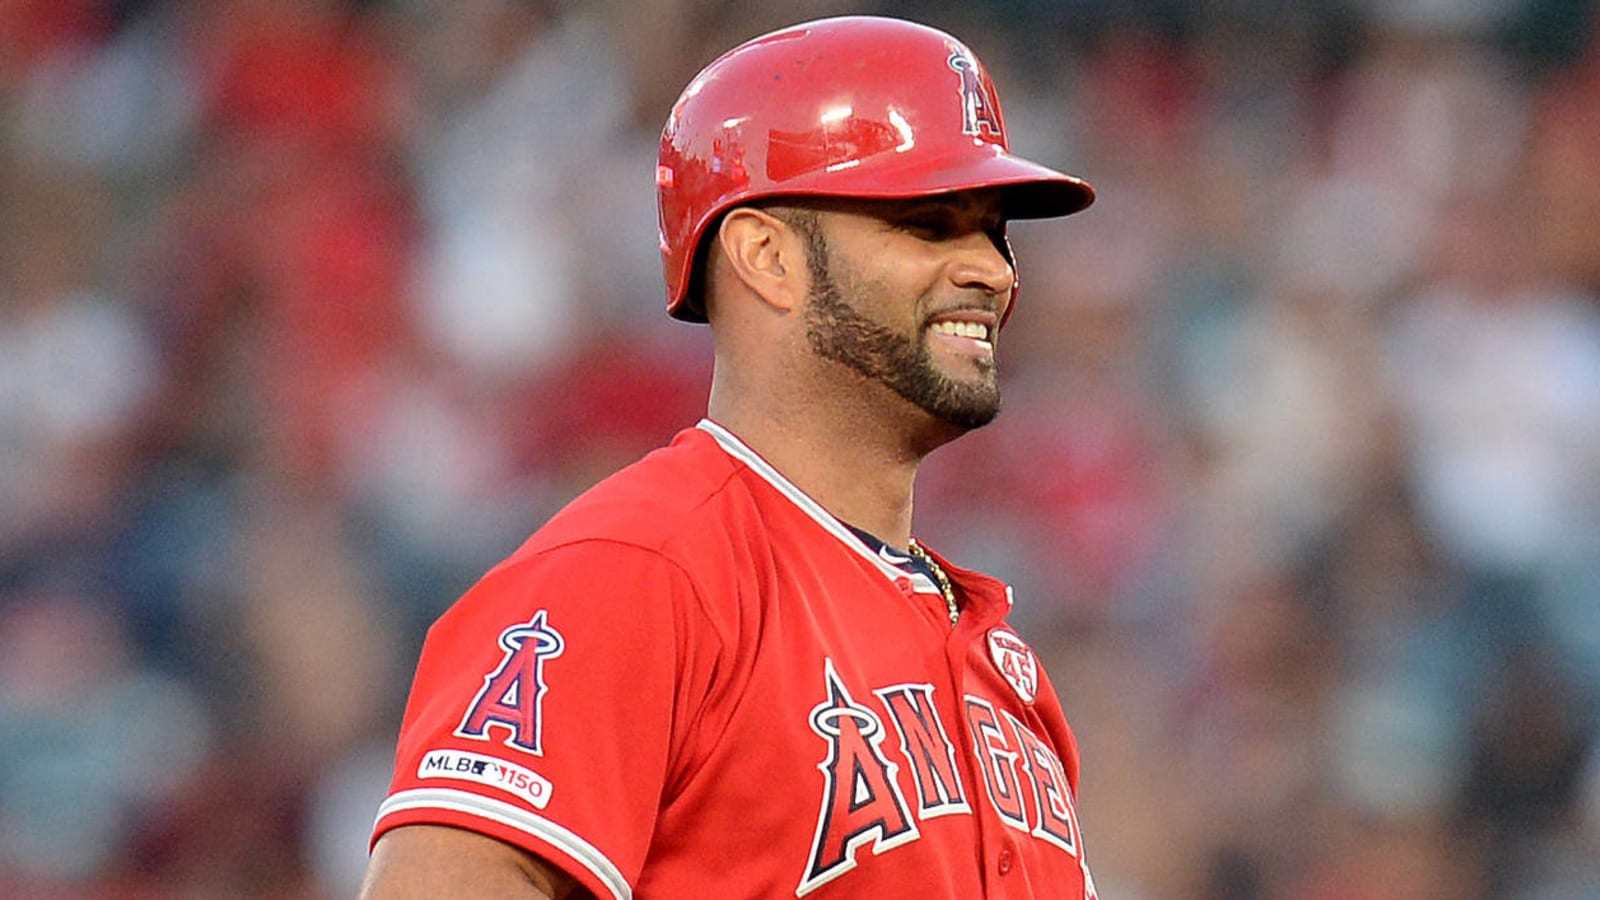 Dontrelle Willis says Albert Pujols once took him to dinner after homering off him